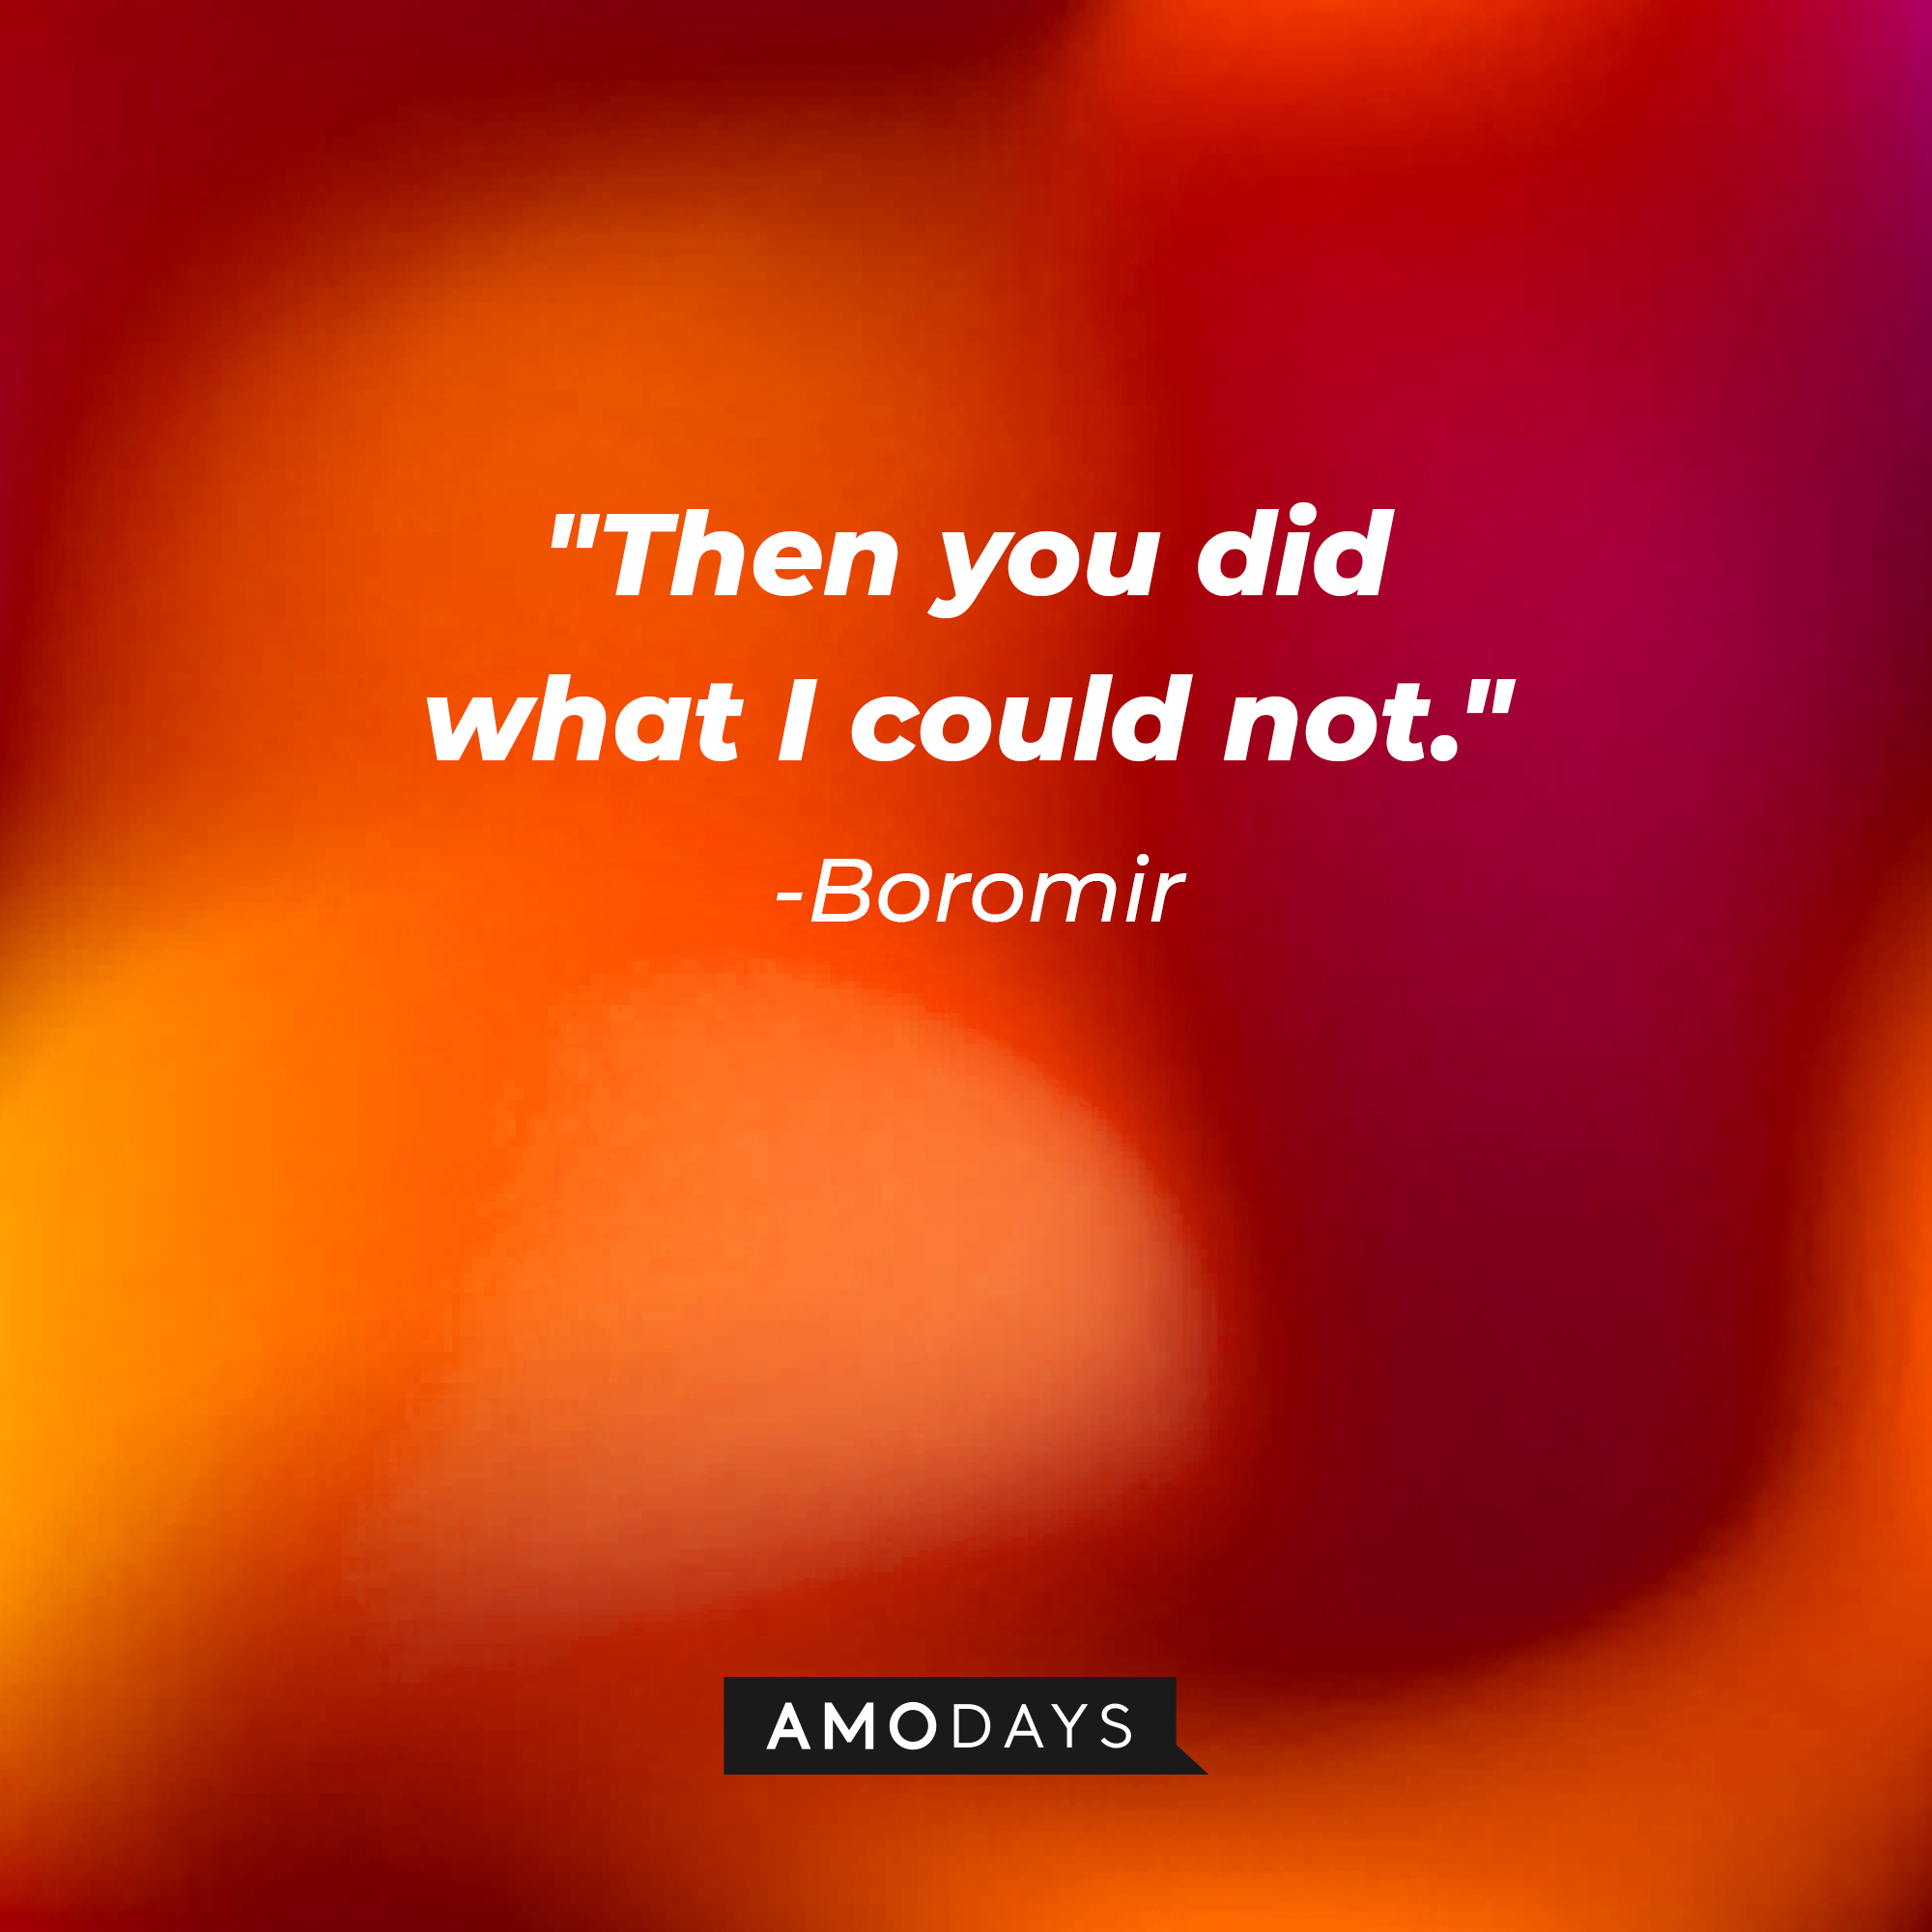 Boromir's quote: "Then you did what I could not." | Source: AmoDays